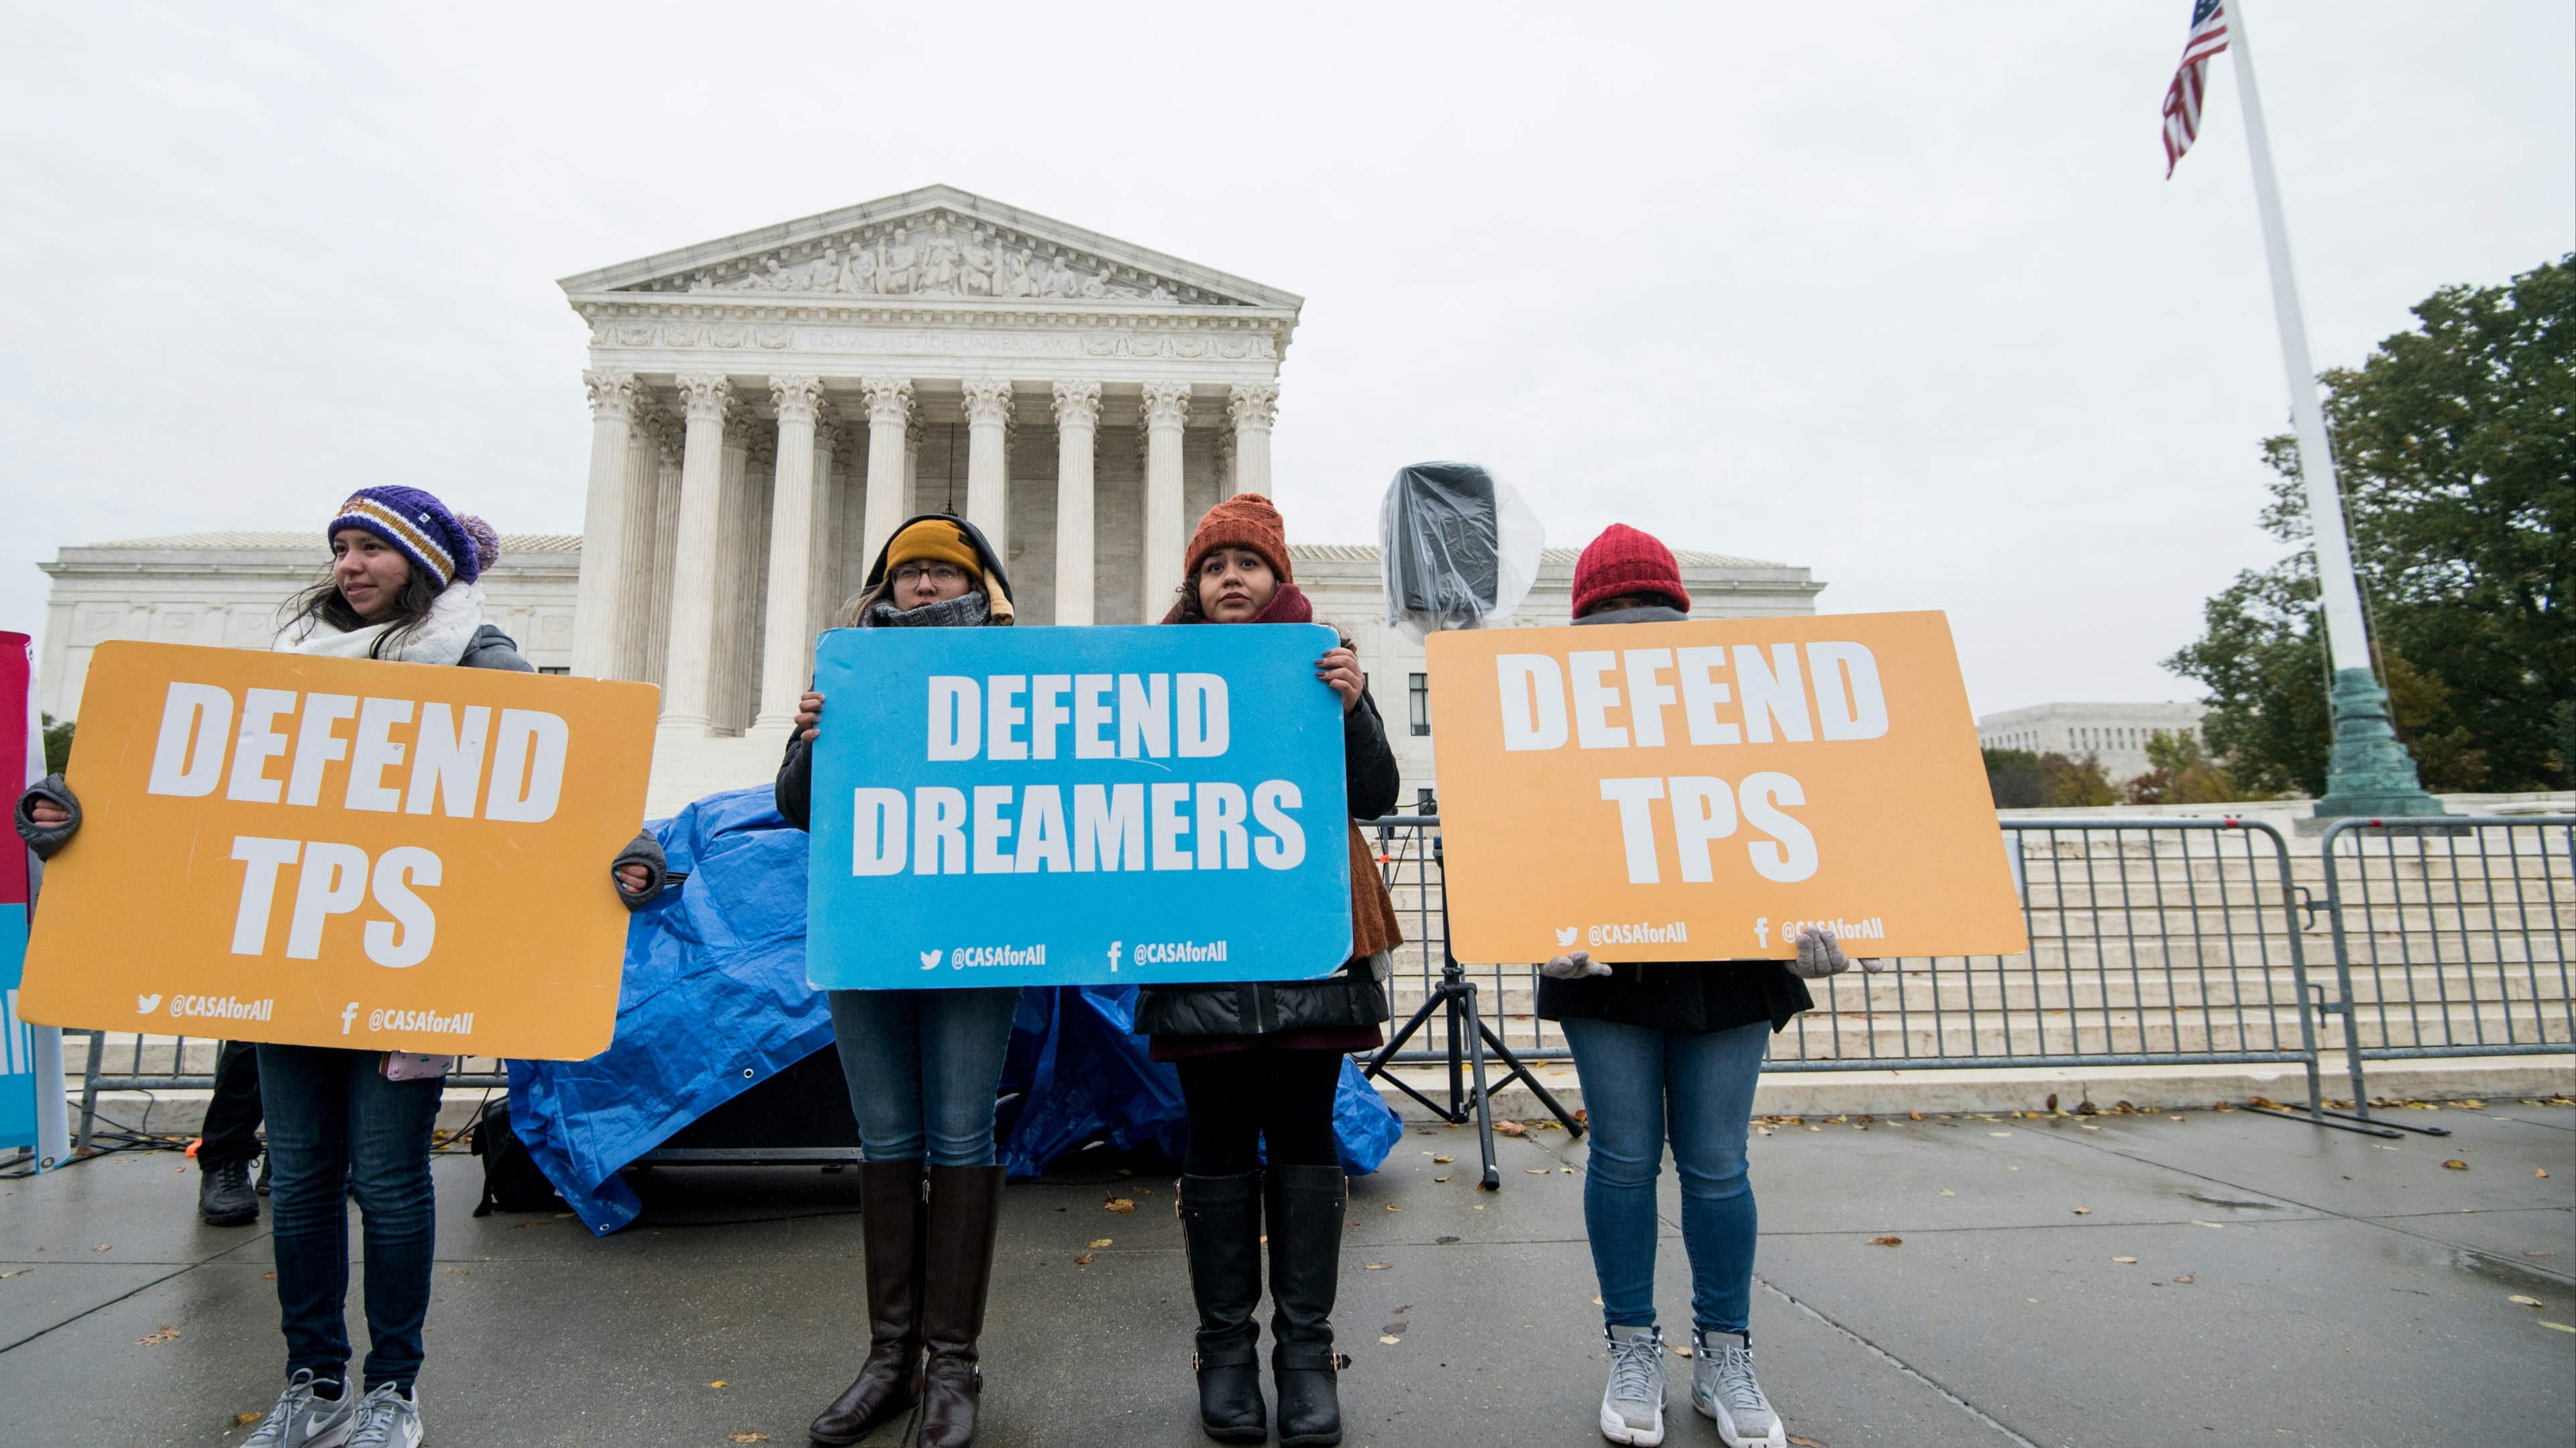 Protesters hold signs supporting dreamers and TPS outside of the U.S. Supreme Court 